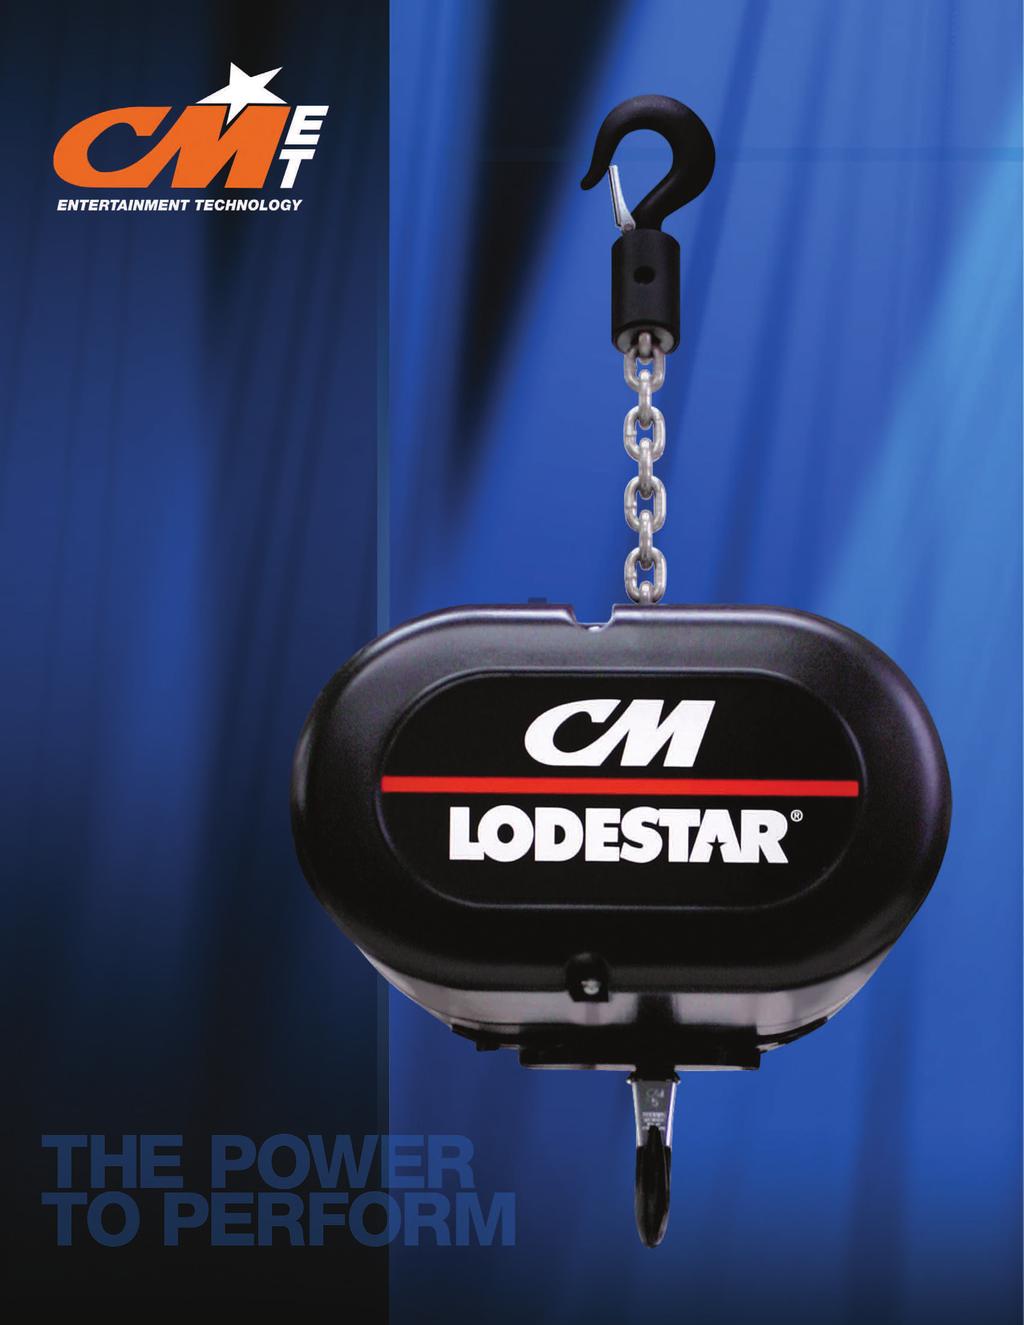 Columbus McKinnon Entertainment Technology (CM-ET), the industry leader in providing quality lifting and positioning equipment for riggers around the globe, presents the new Lodestar Electric Chain